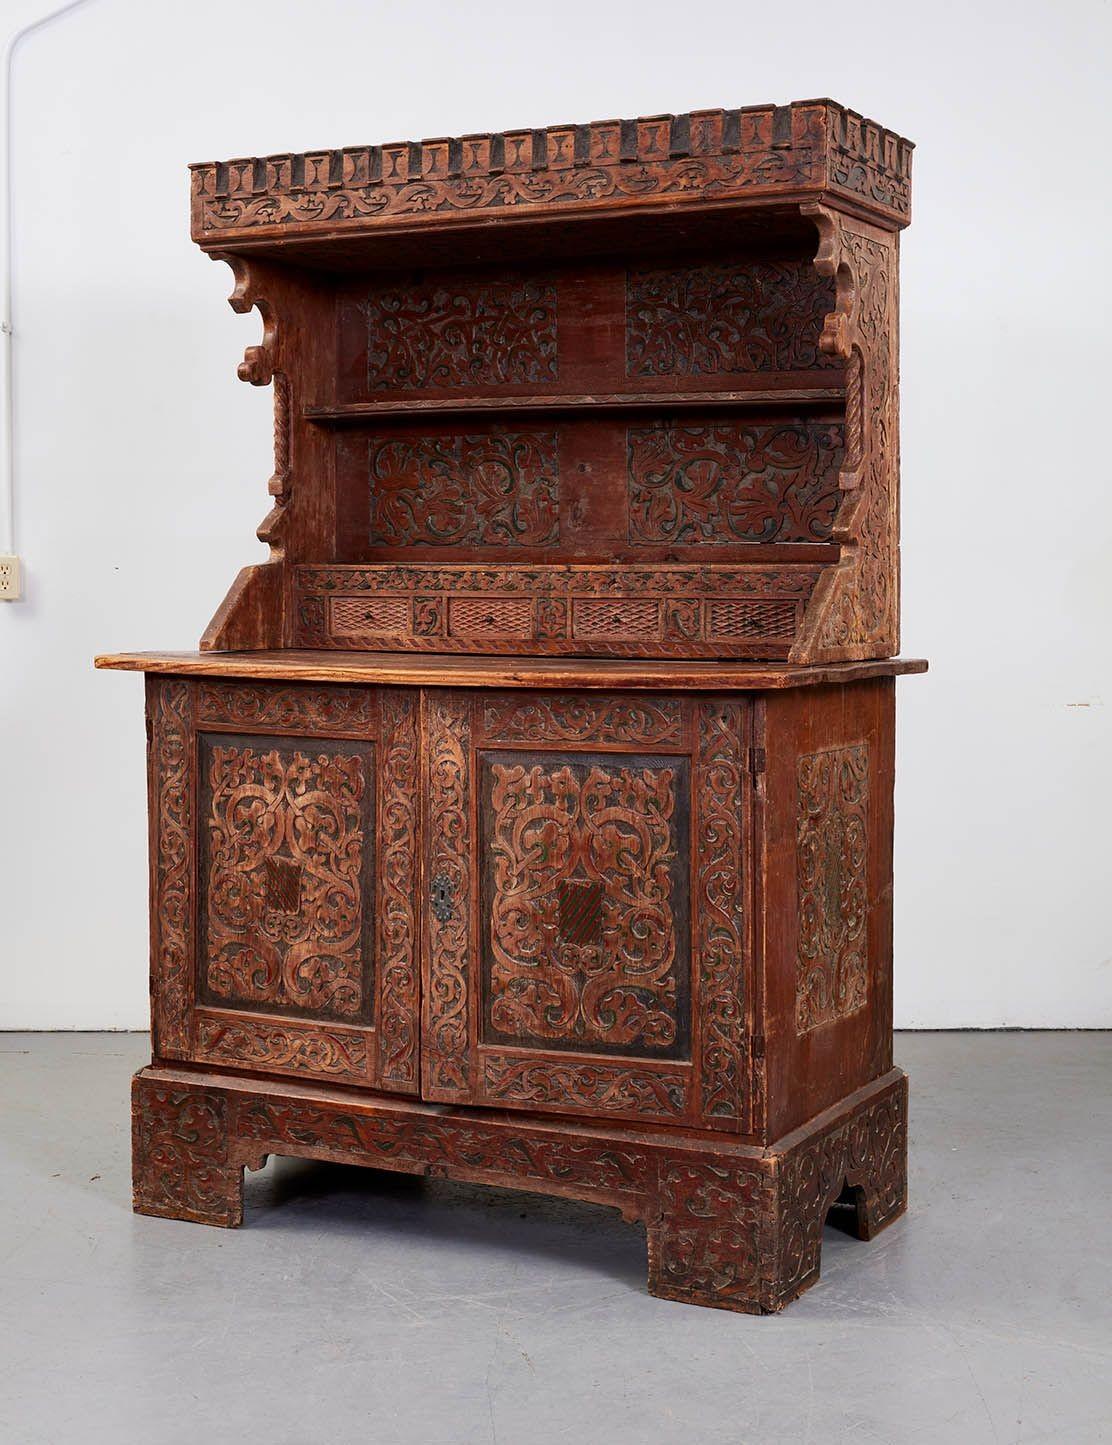 A very rare early 17th century Swiss flachesgurtwerk manorial court cupboard having overhanging dentil carved canopy with carved underside on gothic flanges and baroque columns over shelves and spice drawers above lower cupboard with two doors,